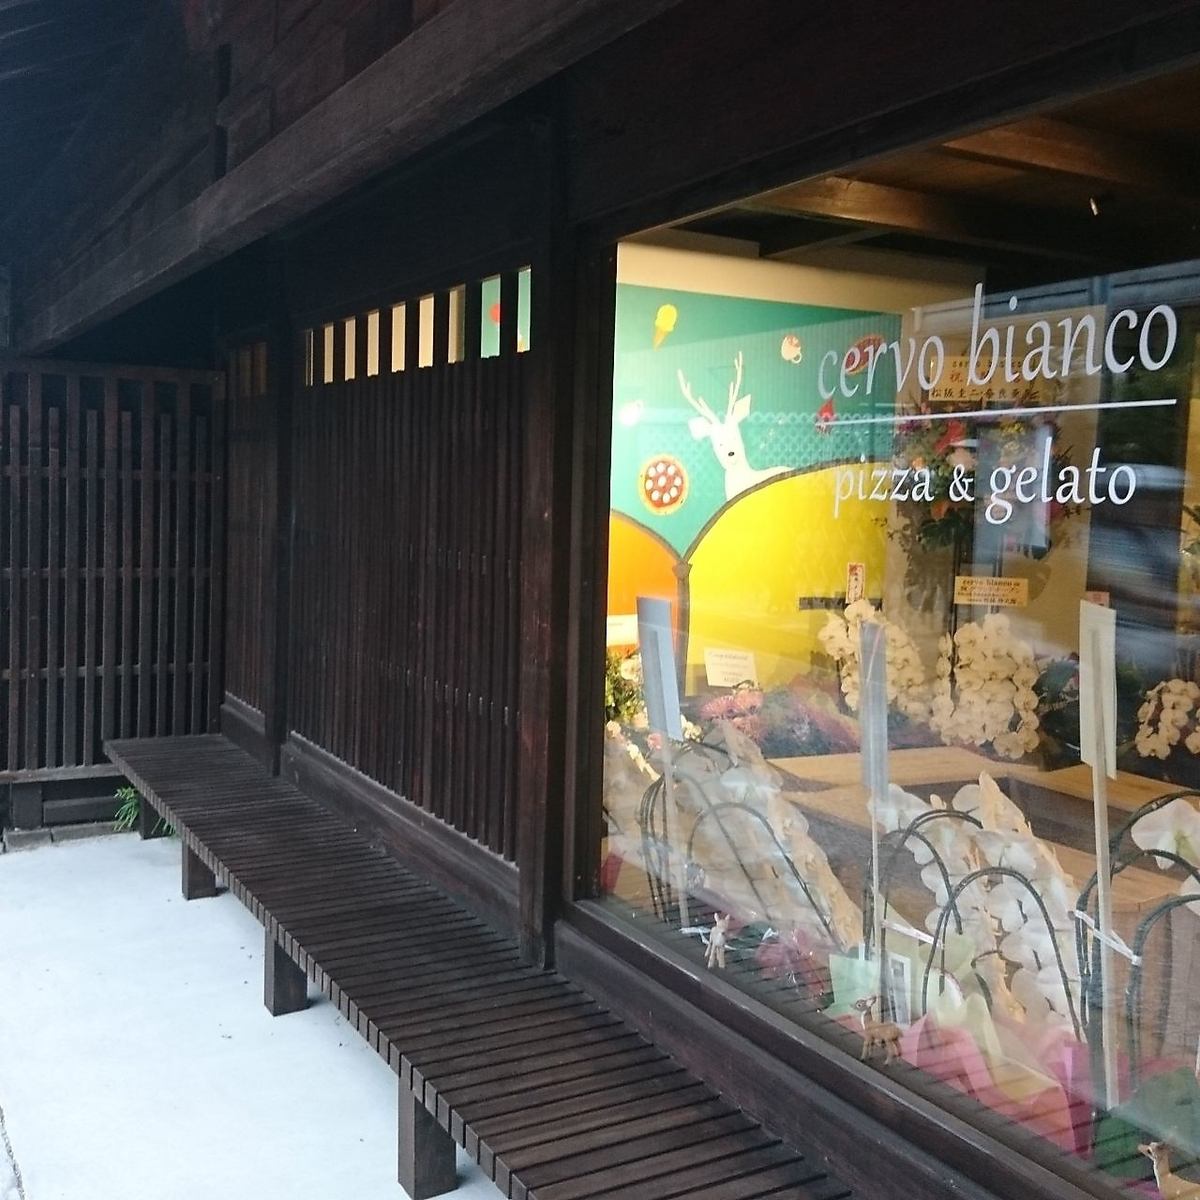 Have a stylish lunch inside and outside the store where you can feel the atmosphere of Nara ♪